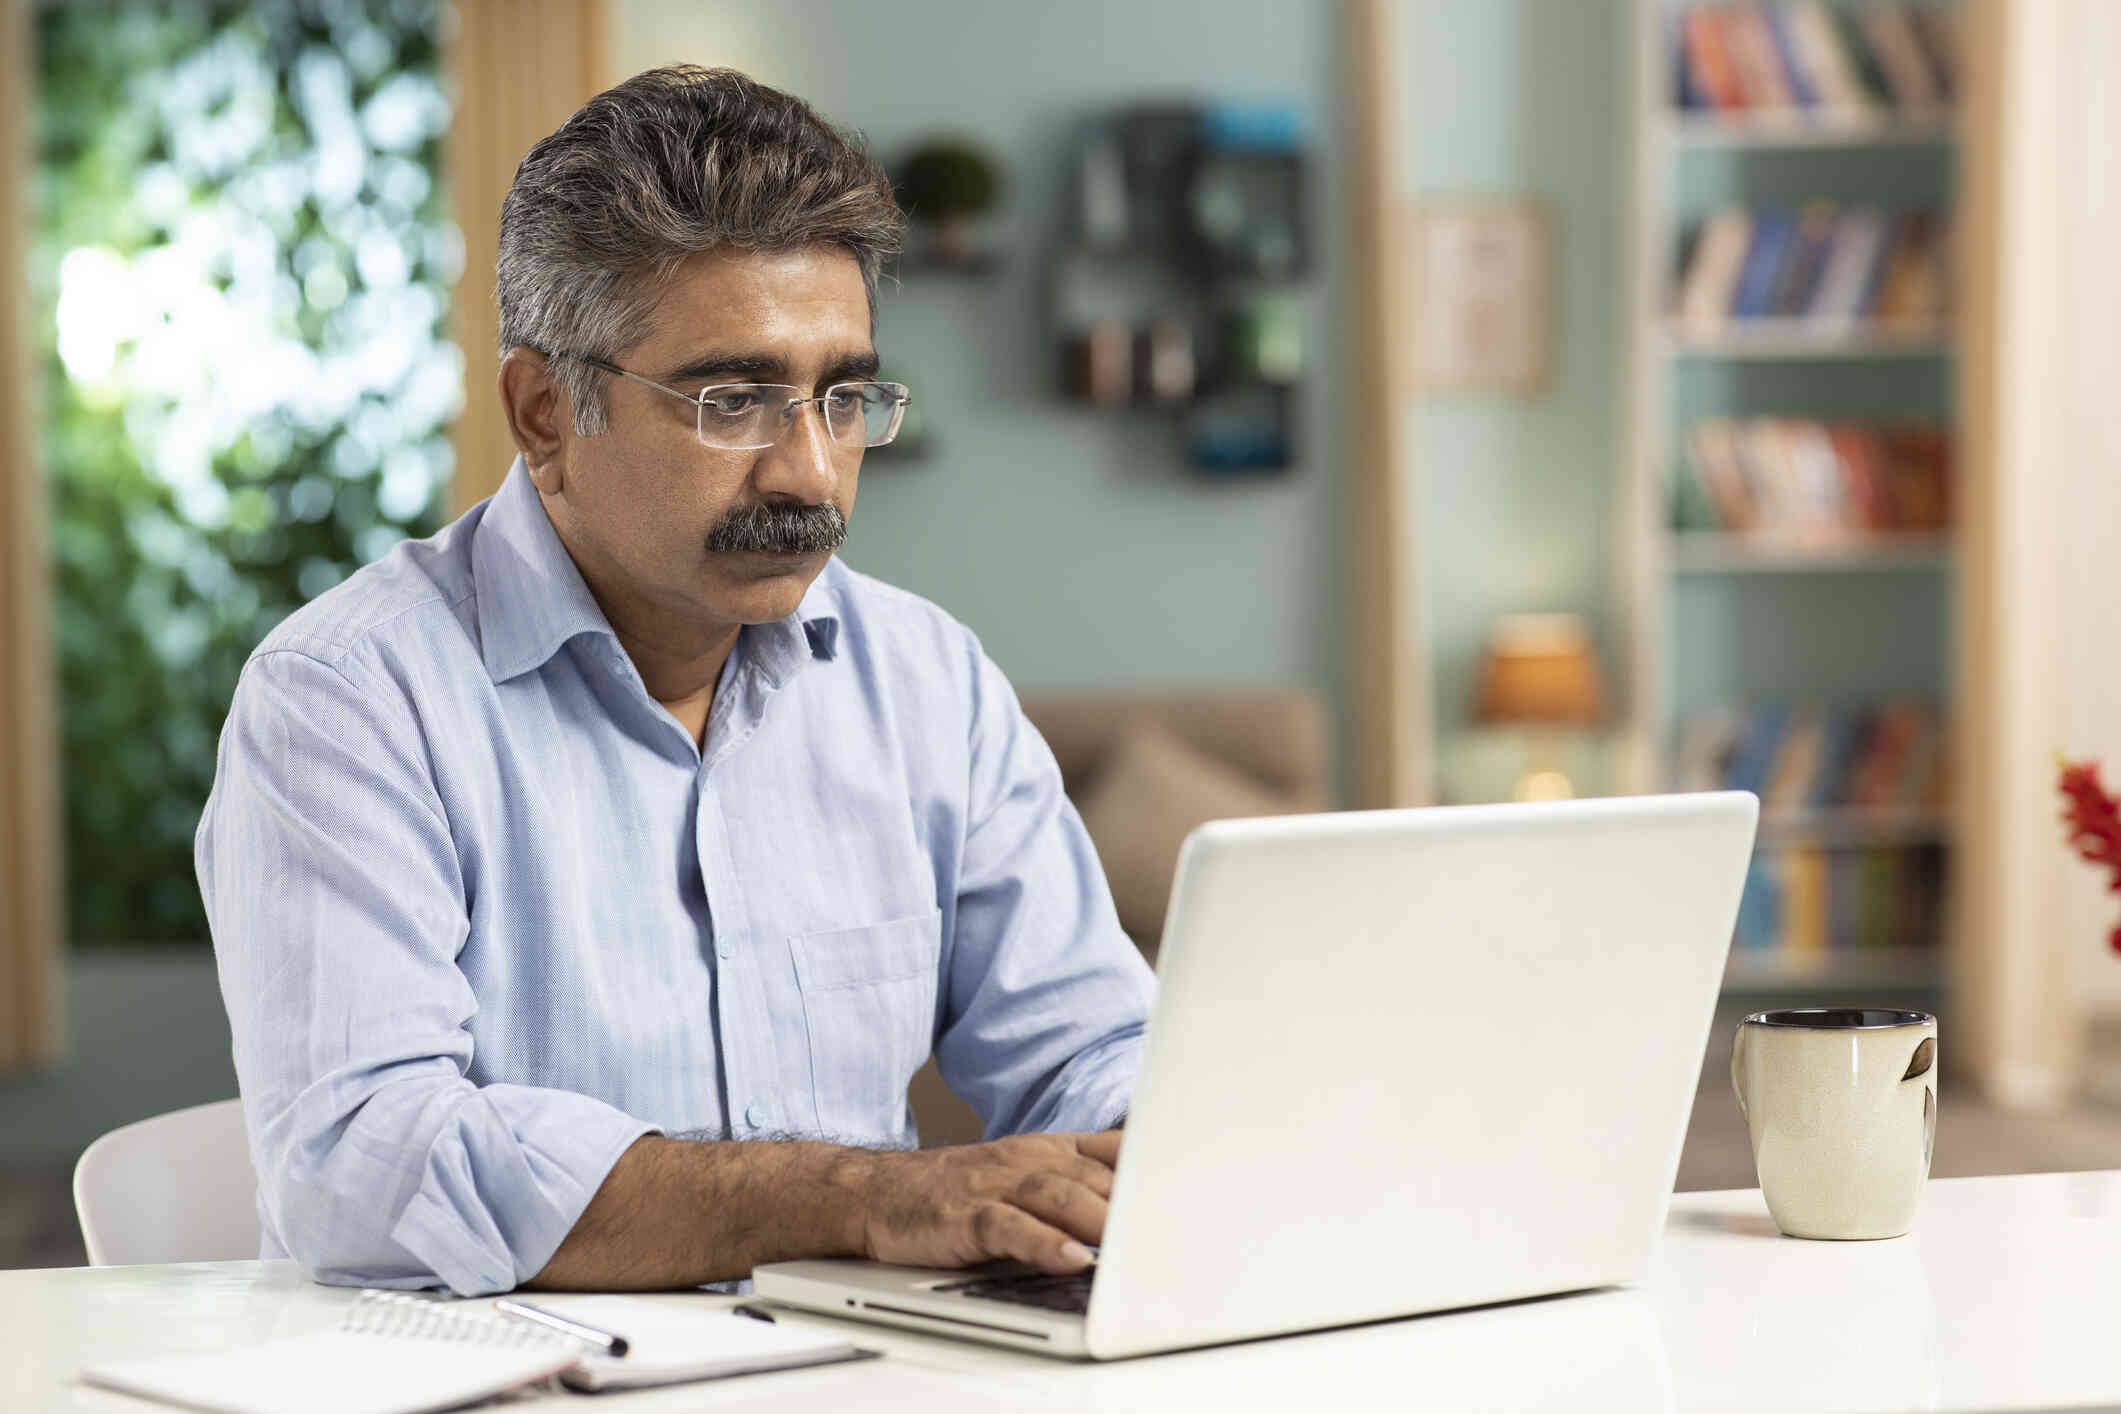 A man in a button down shirt sits at a wooden kitchen table and types on the laptop open infront of him.